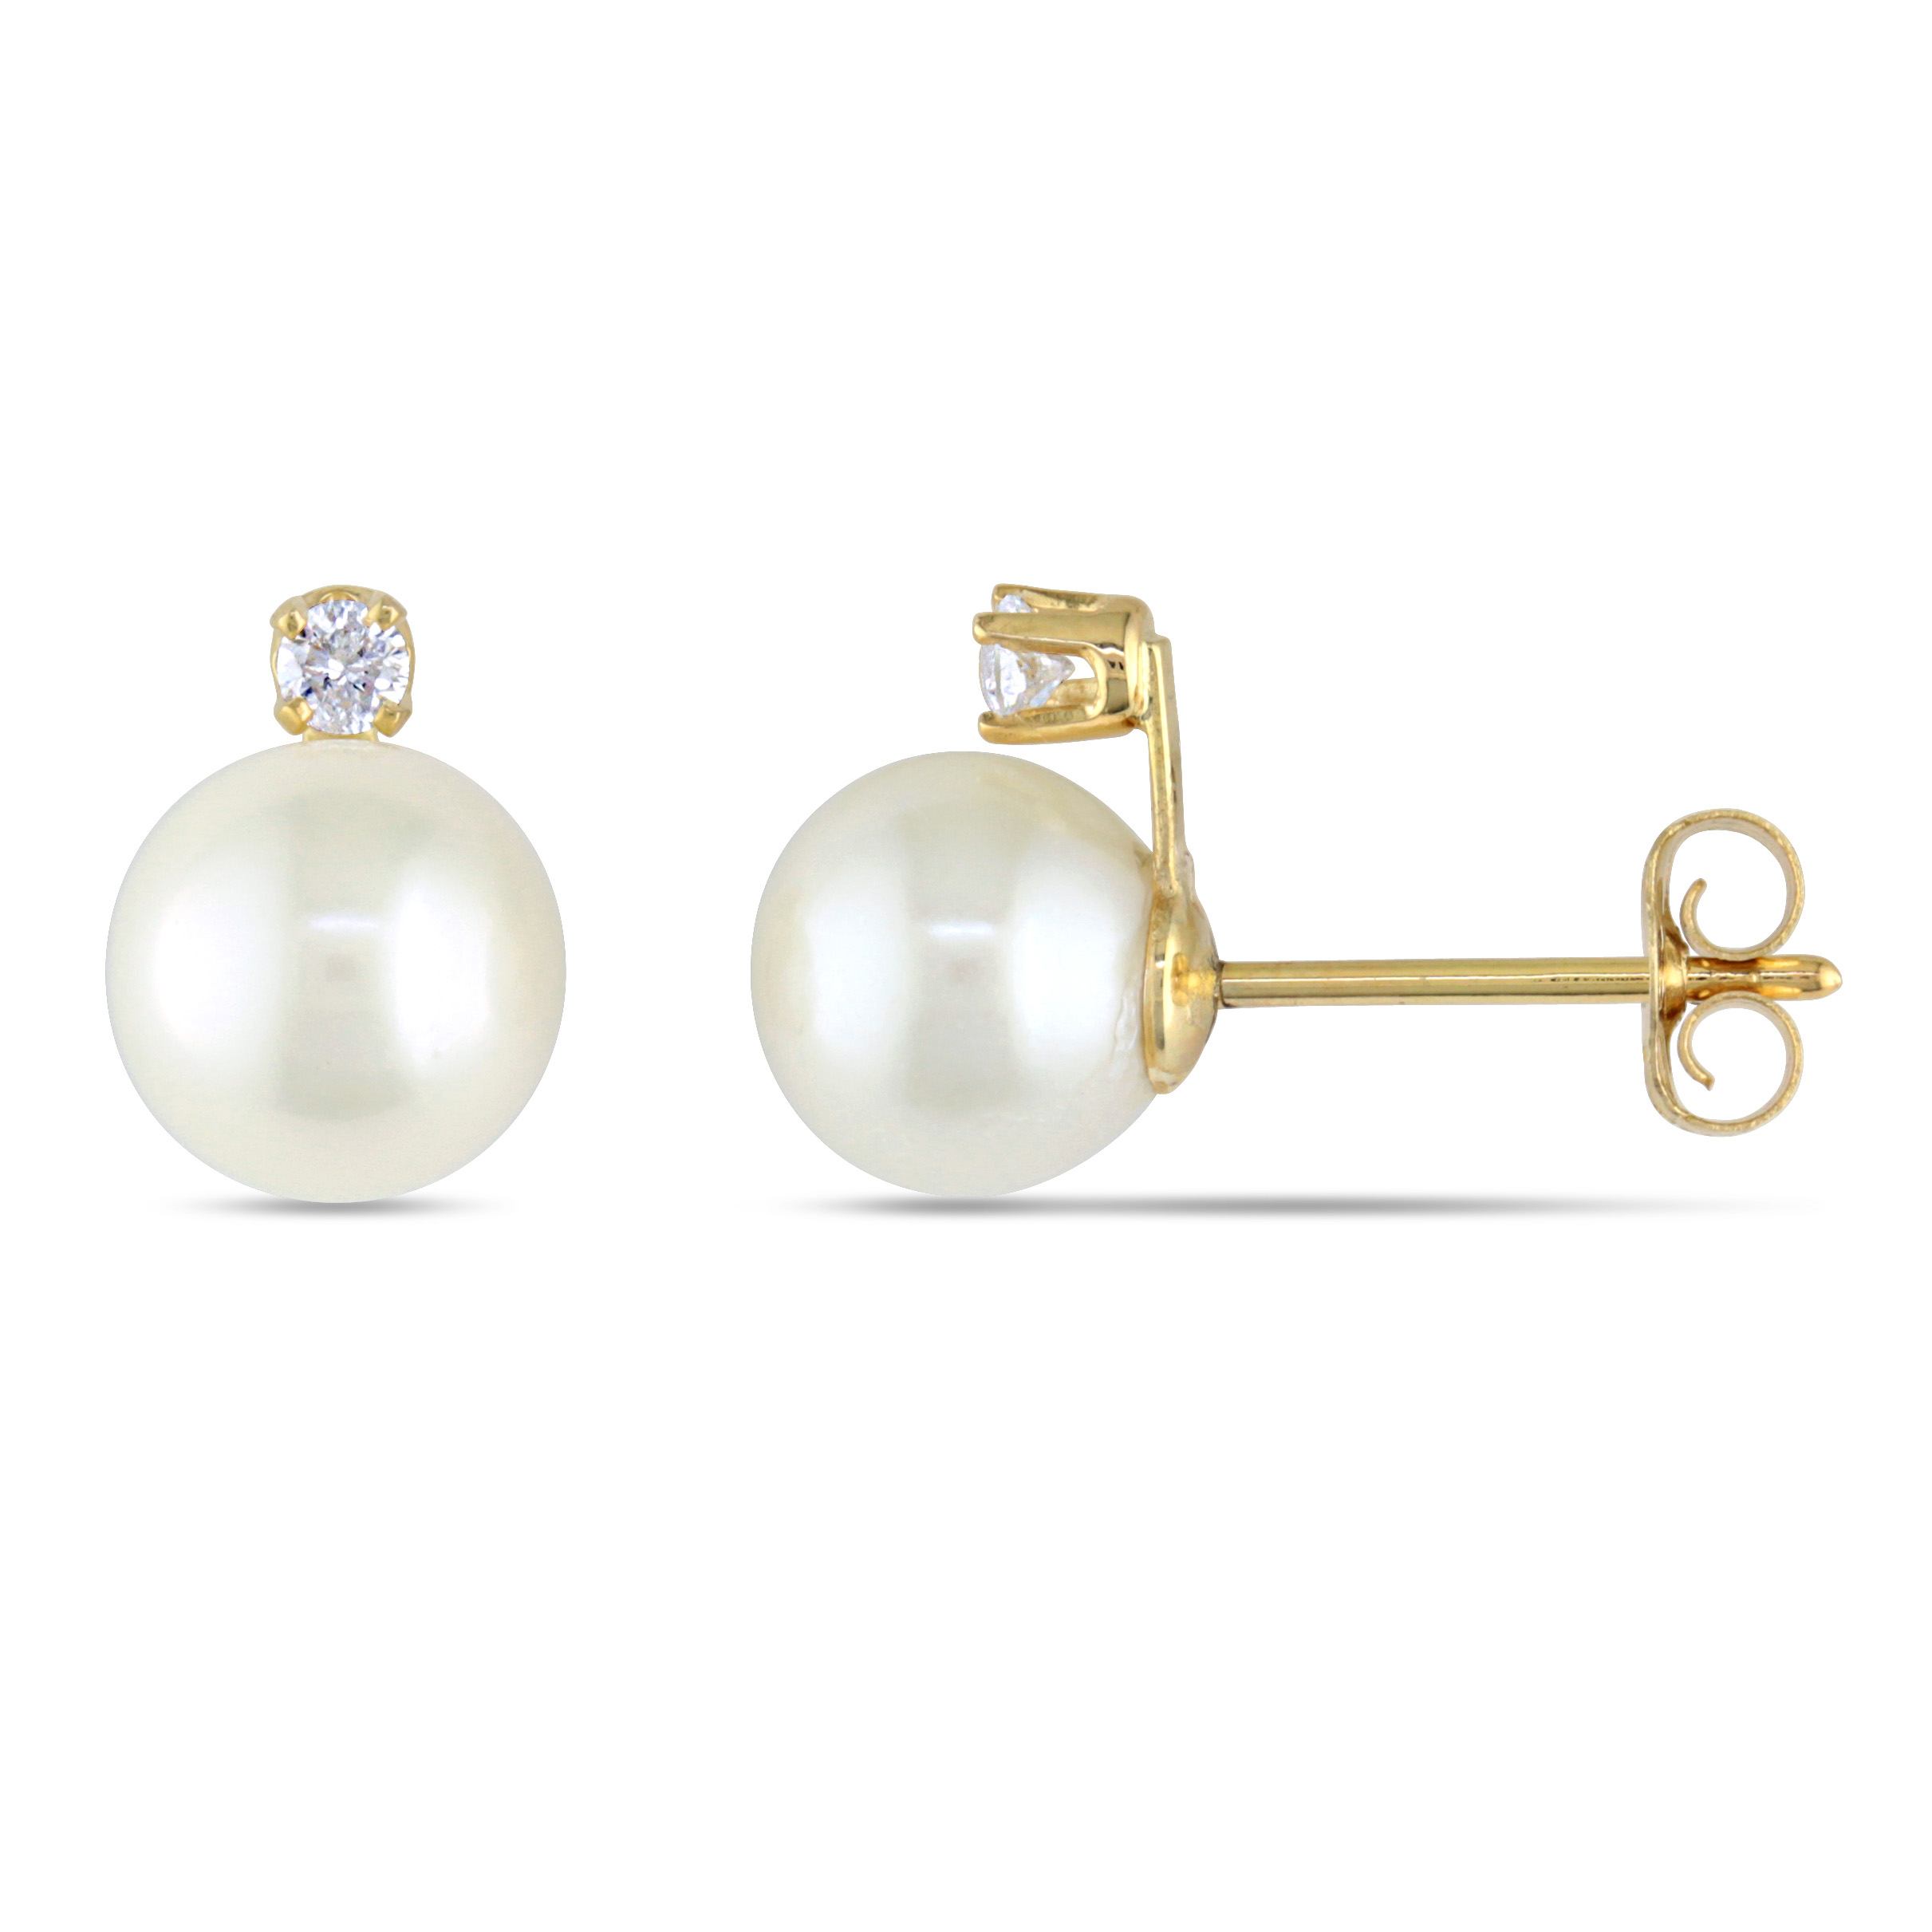 6.5 - 7 MM Cultured Freshwater Pearl and Diamond Stud Earrings in 14k Yellow Gold